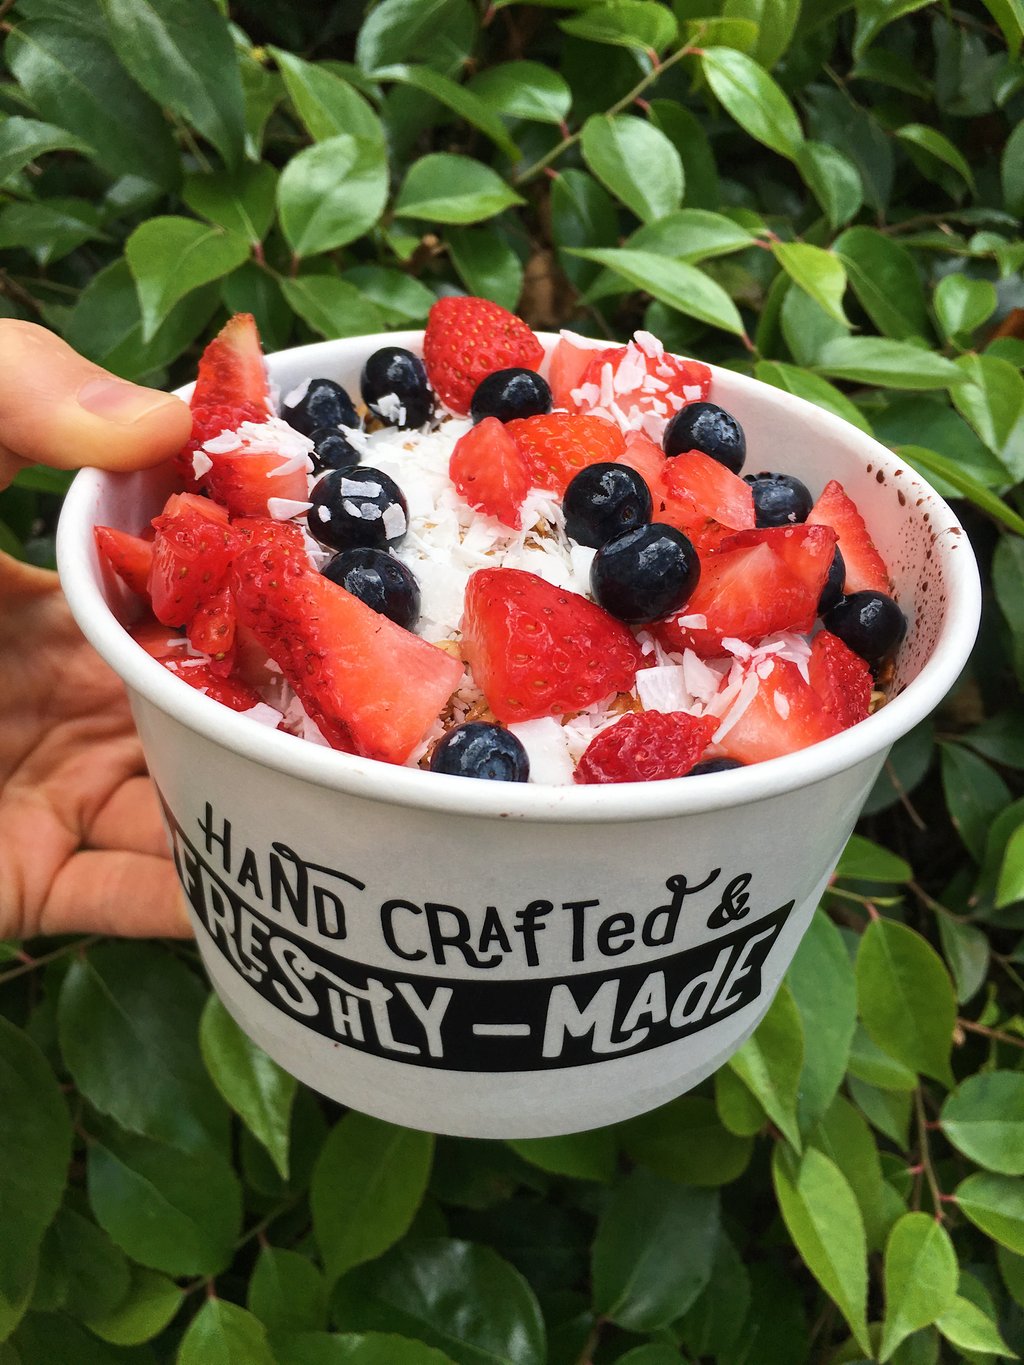 Blenders acai bowls: Nutritious and delicious – The Cougar Press